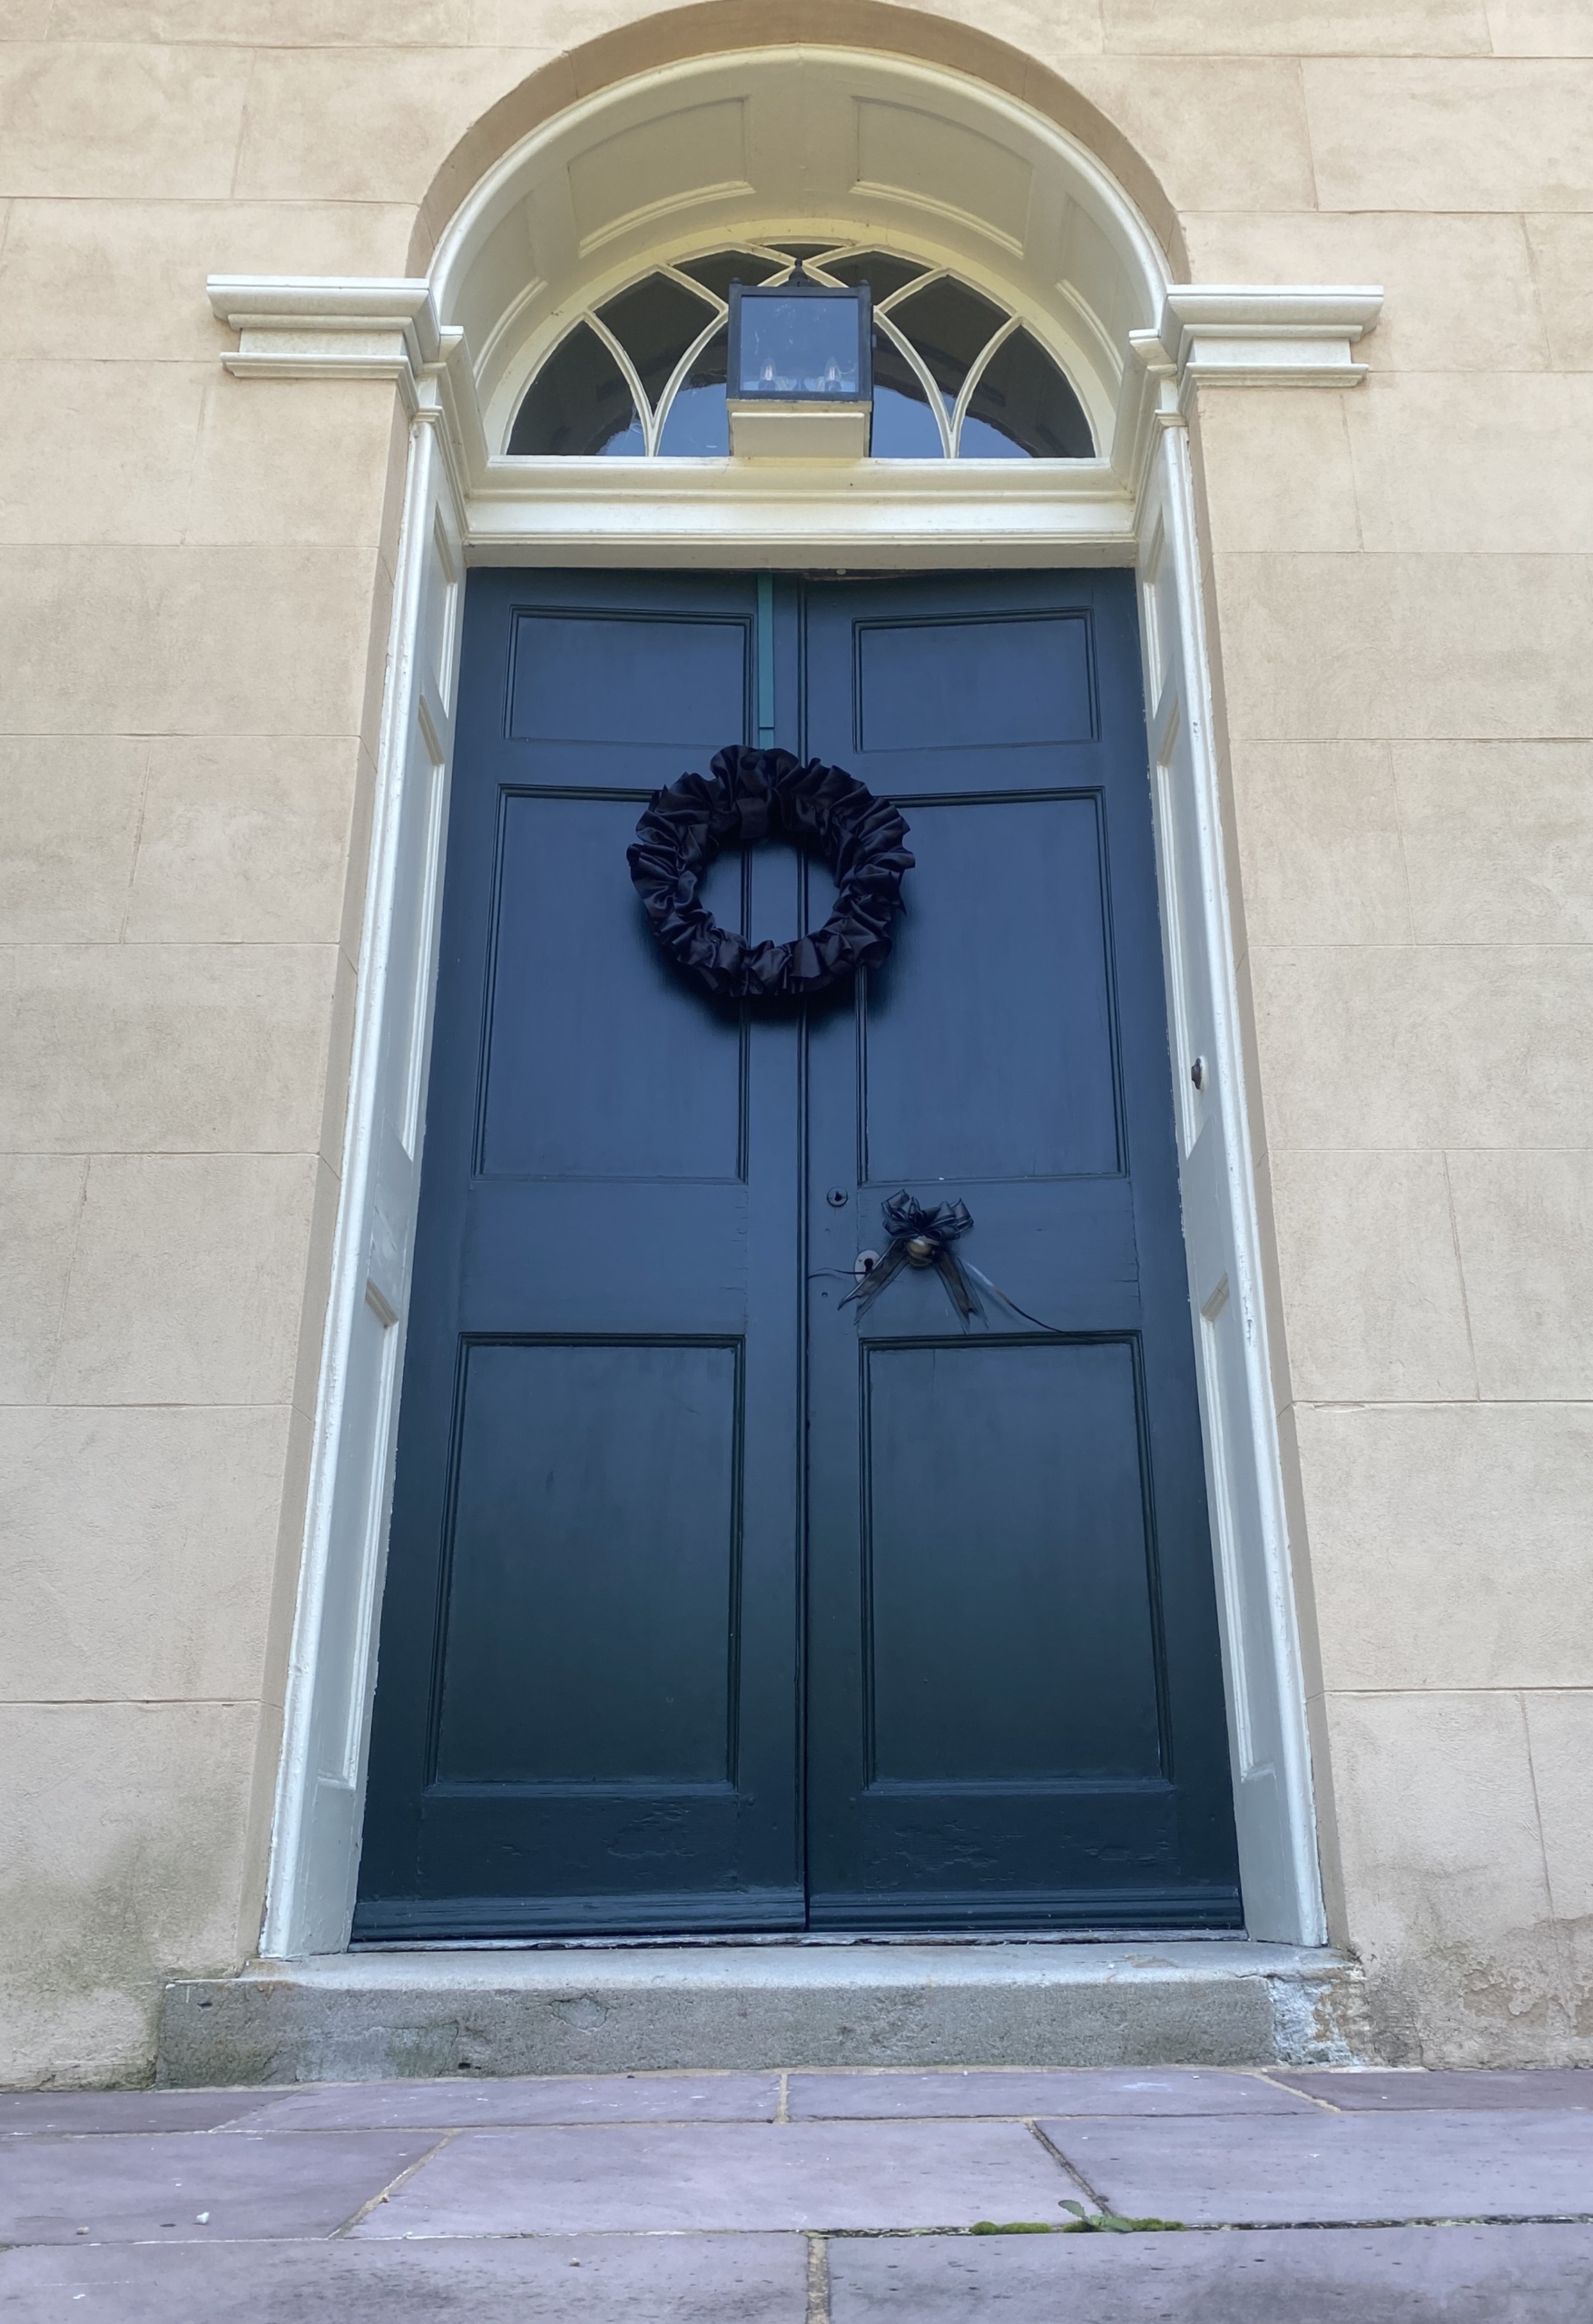 Black wreath on door - a 19th century Victorian tradition to indicate a family was in mourning